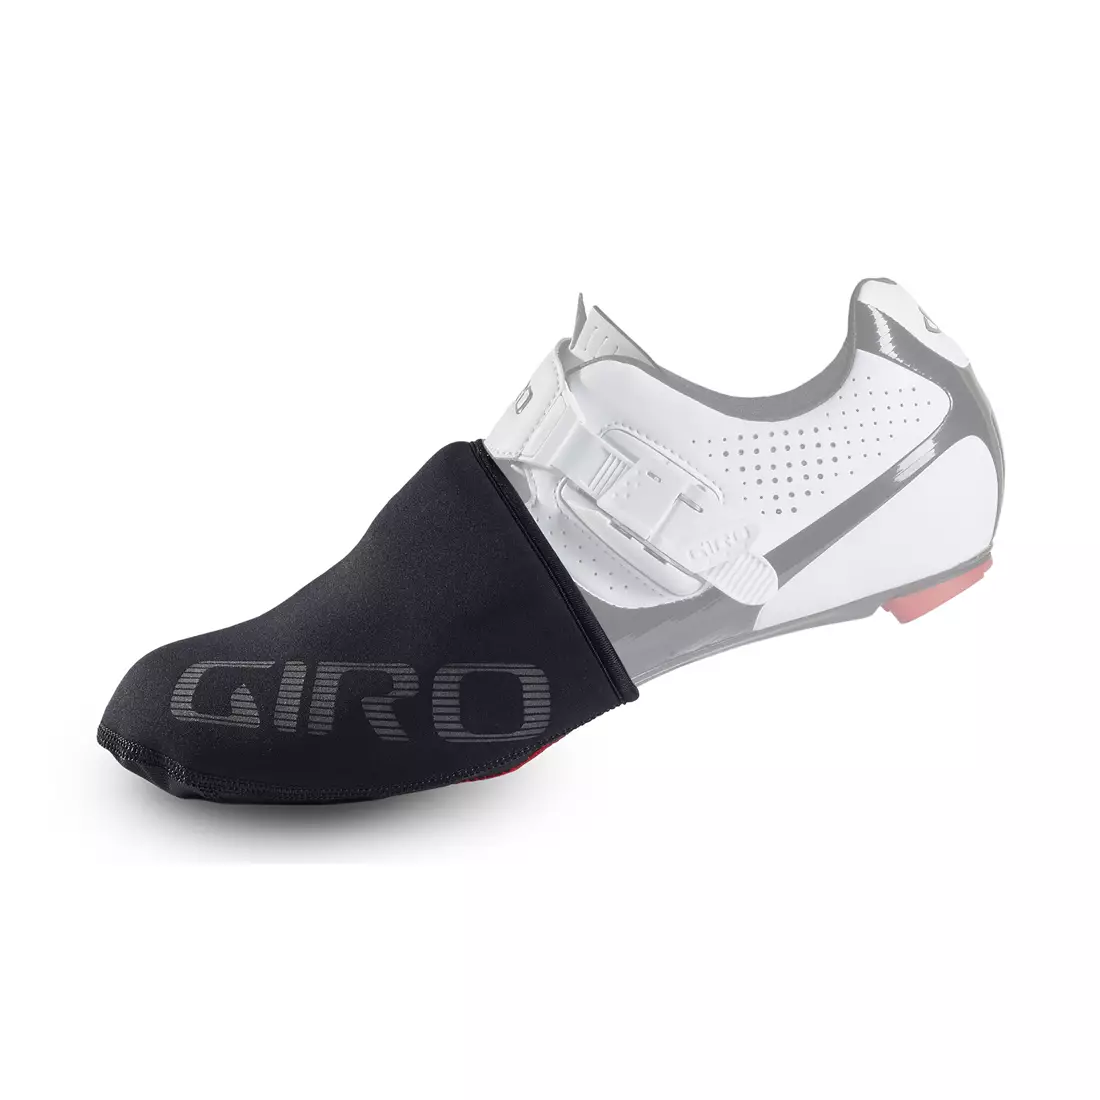 GIRO covers for bicycle shoes ambient toe cvr black GR-7111991